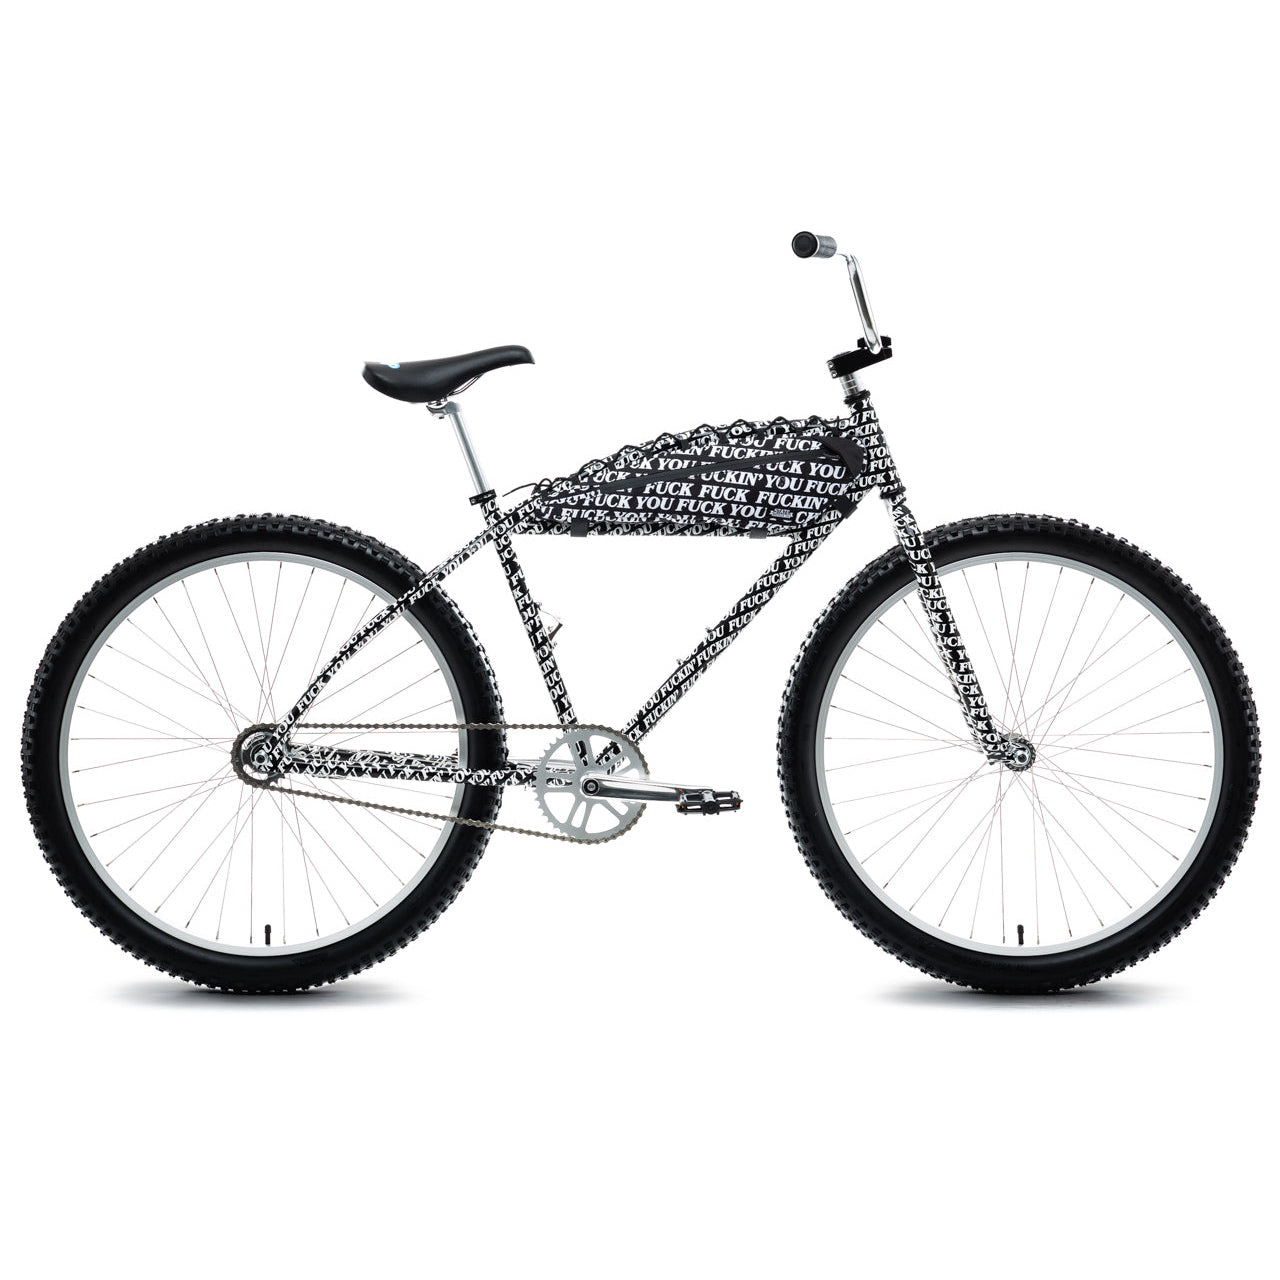 State Bicycle Co. State Bicycle Co. x RIPNDIP - Klunker + Frame Bag Combo - "FU" Edition (27.5")